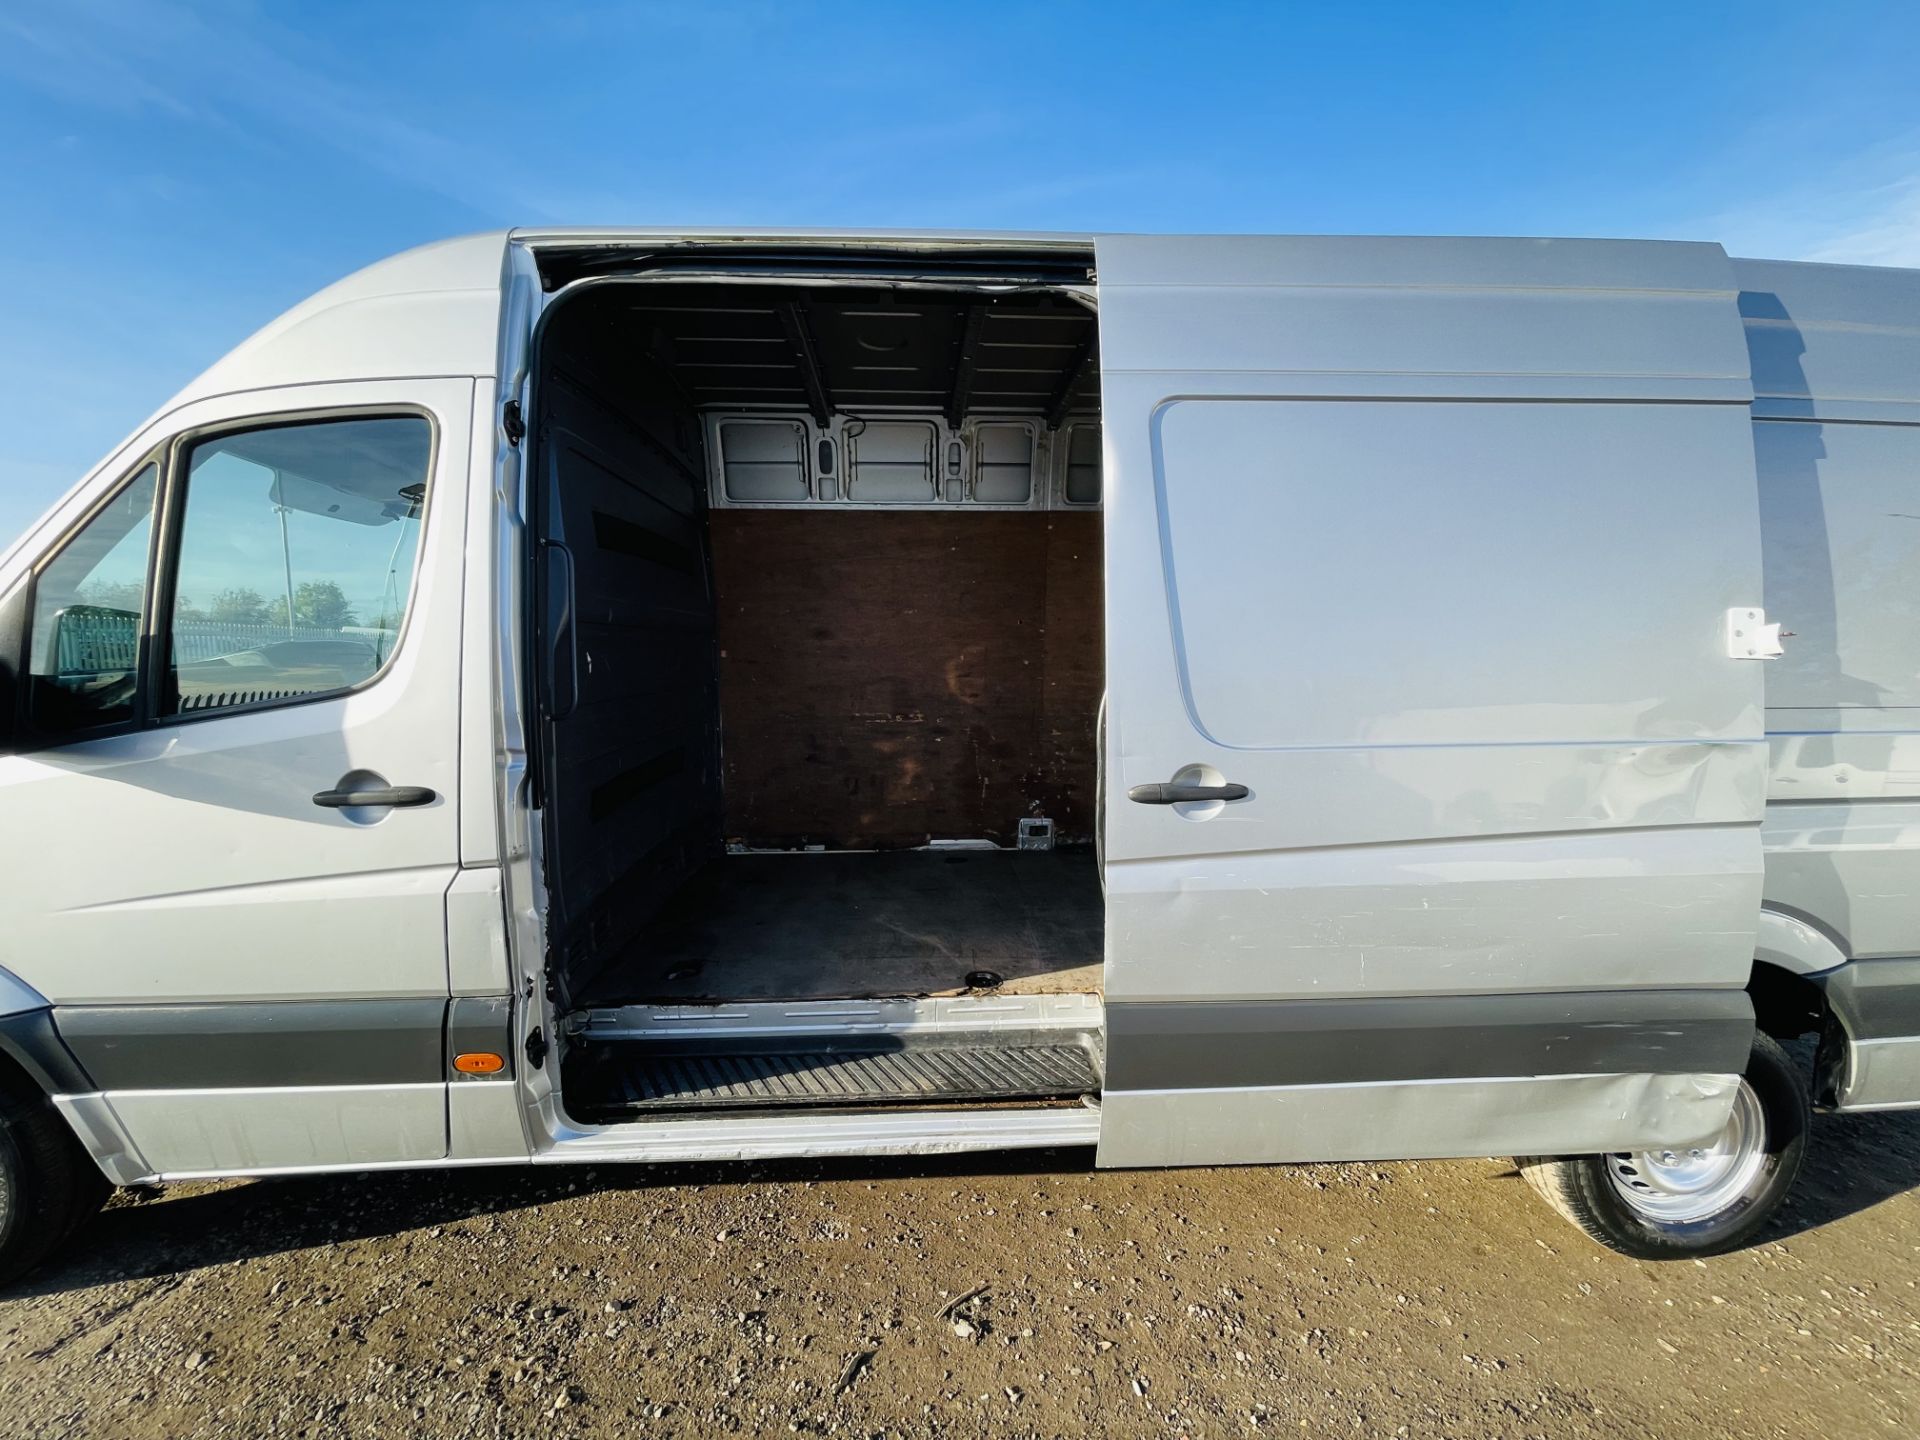 **ON SALE**Volkswagen Crafter CR35 2.0 TDI 109 Bluemotion L3 H2 2012'62 Reg' Air Con Cruise Control - Image 9 of 19